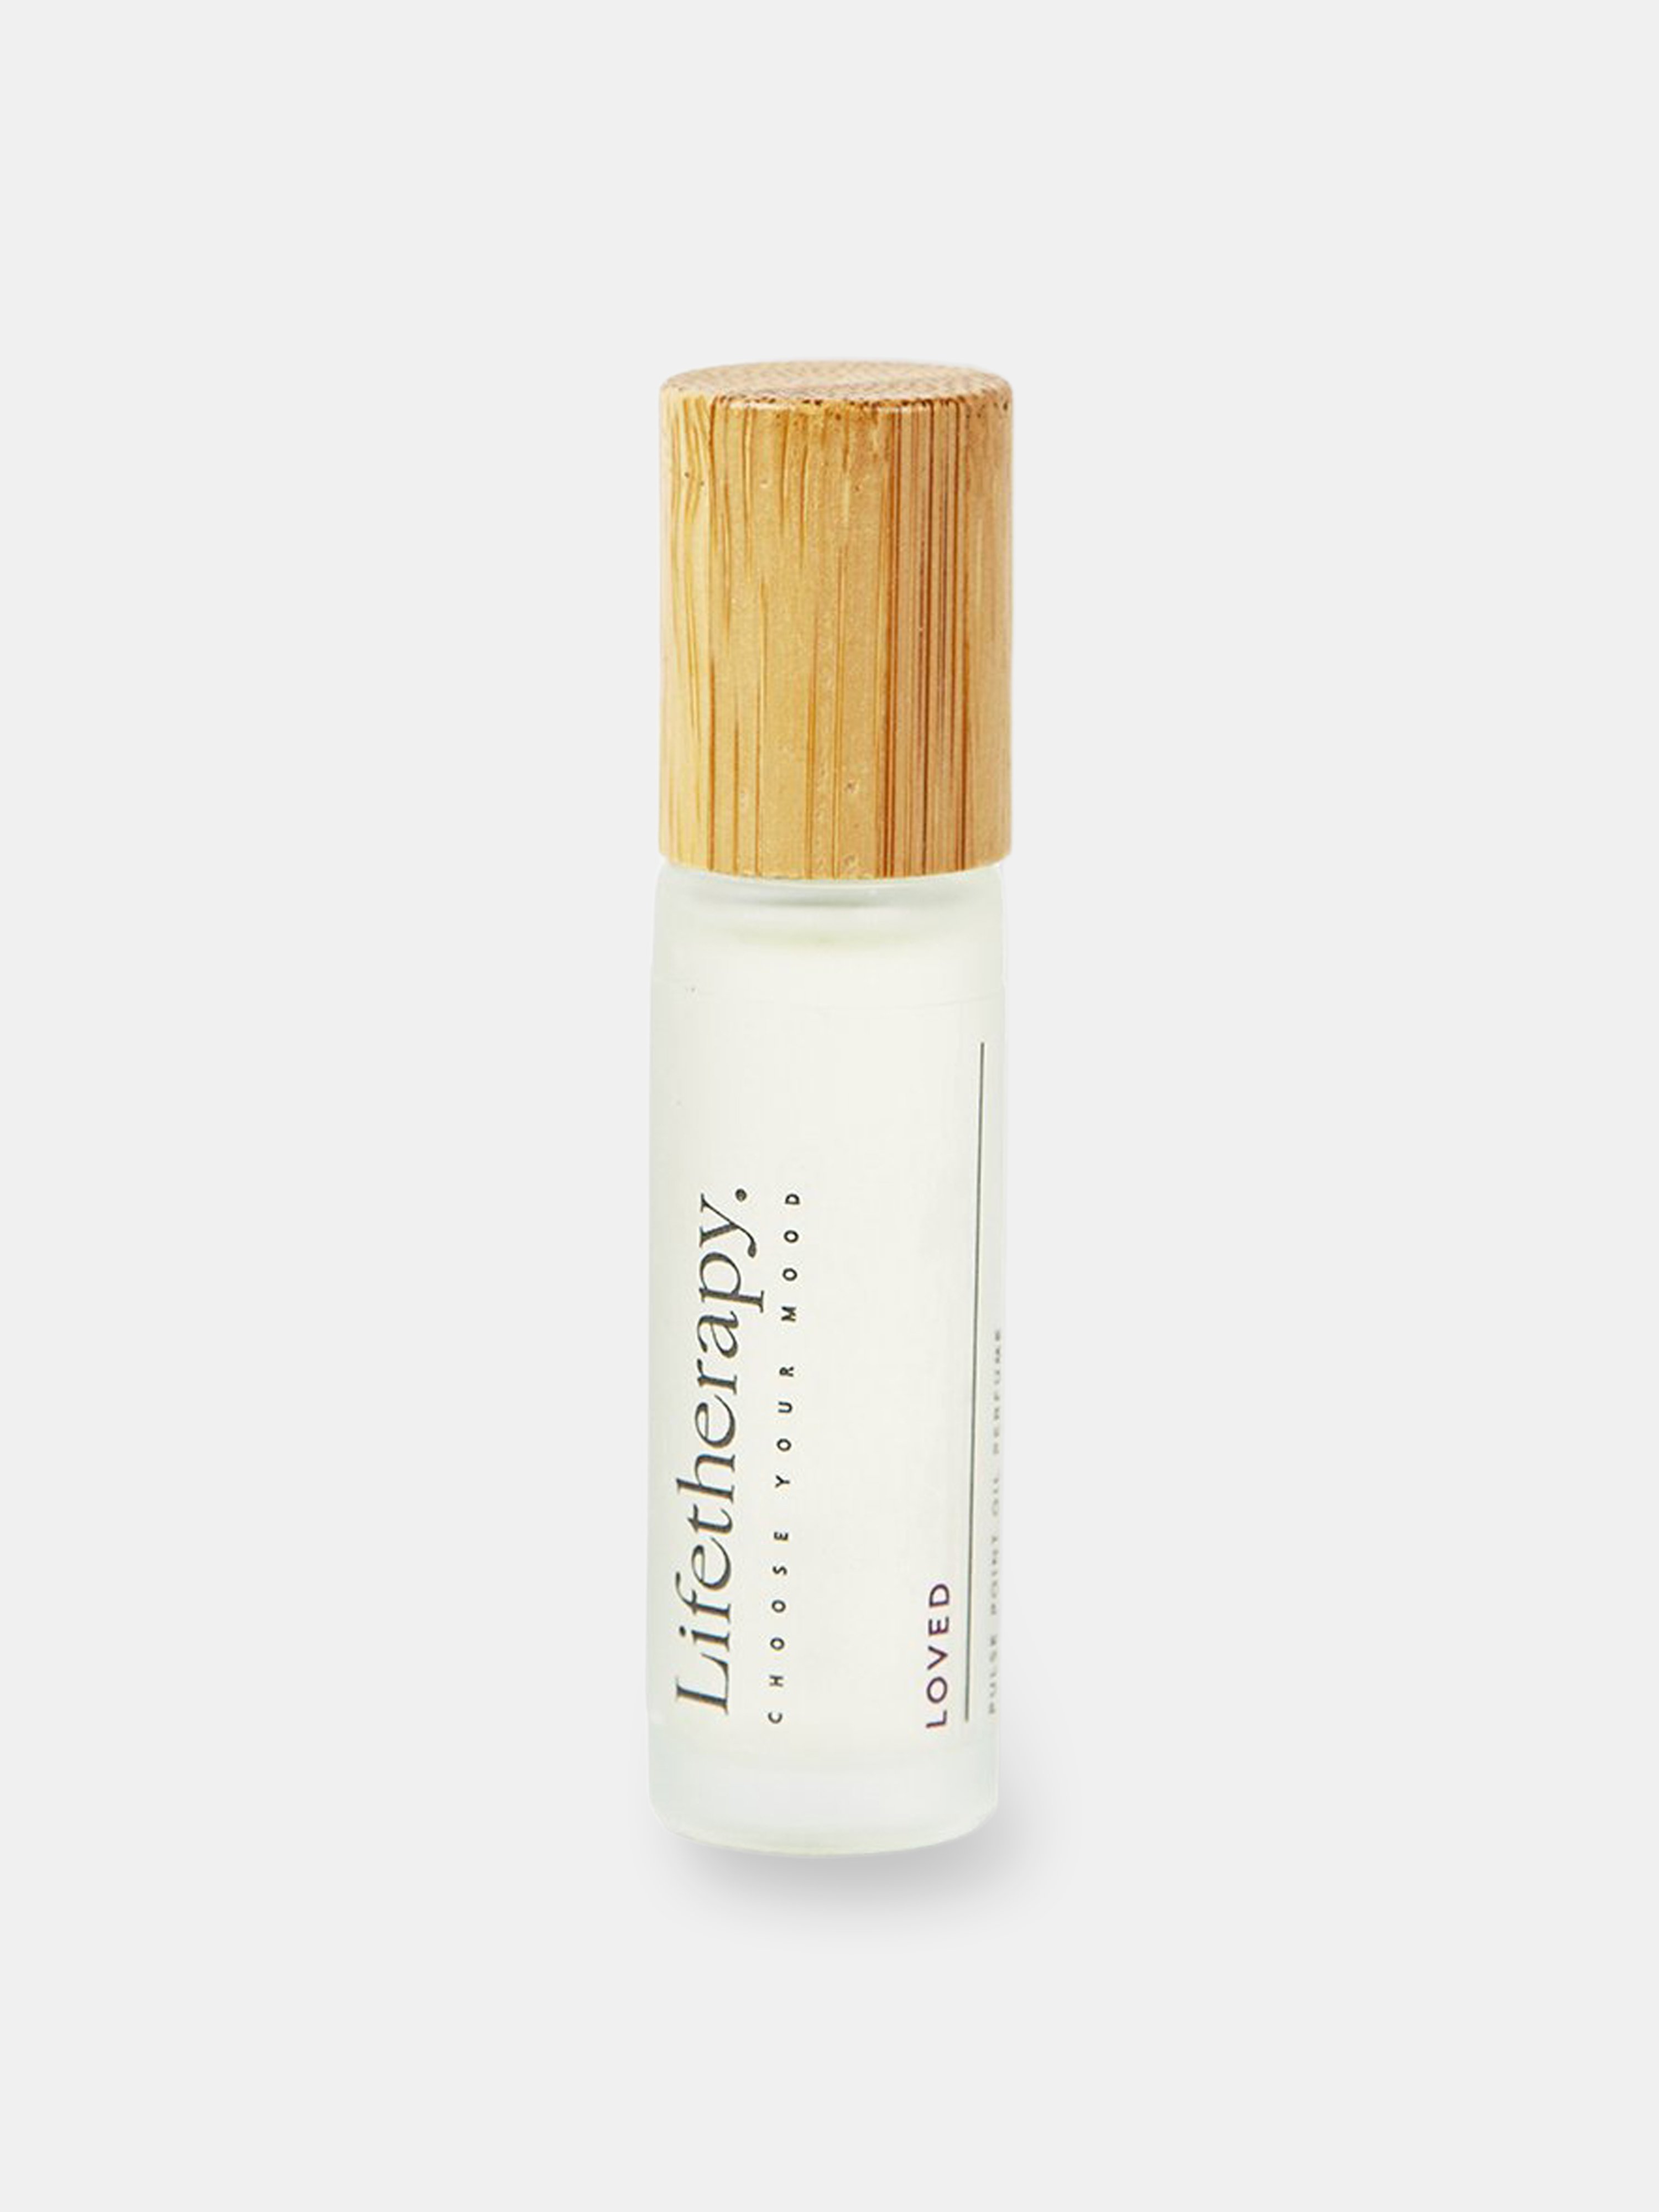 LIFETHERAPY LIFETHERAPY LOVED PULSE POINT OIL ROLL-ON PERFUME